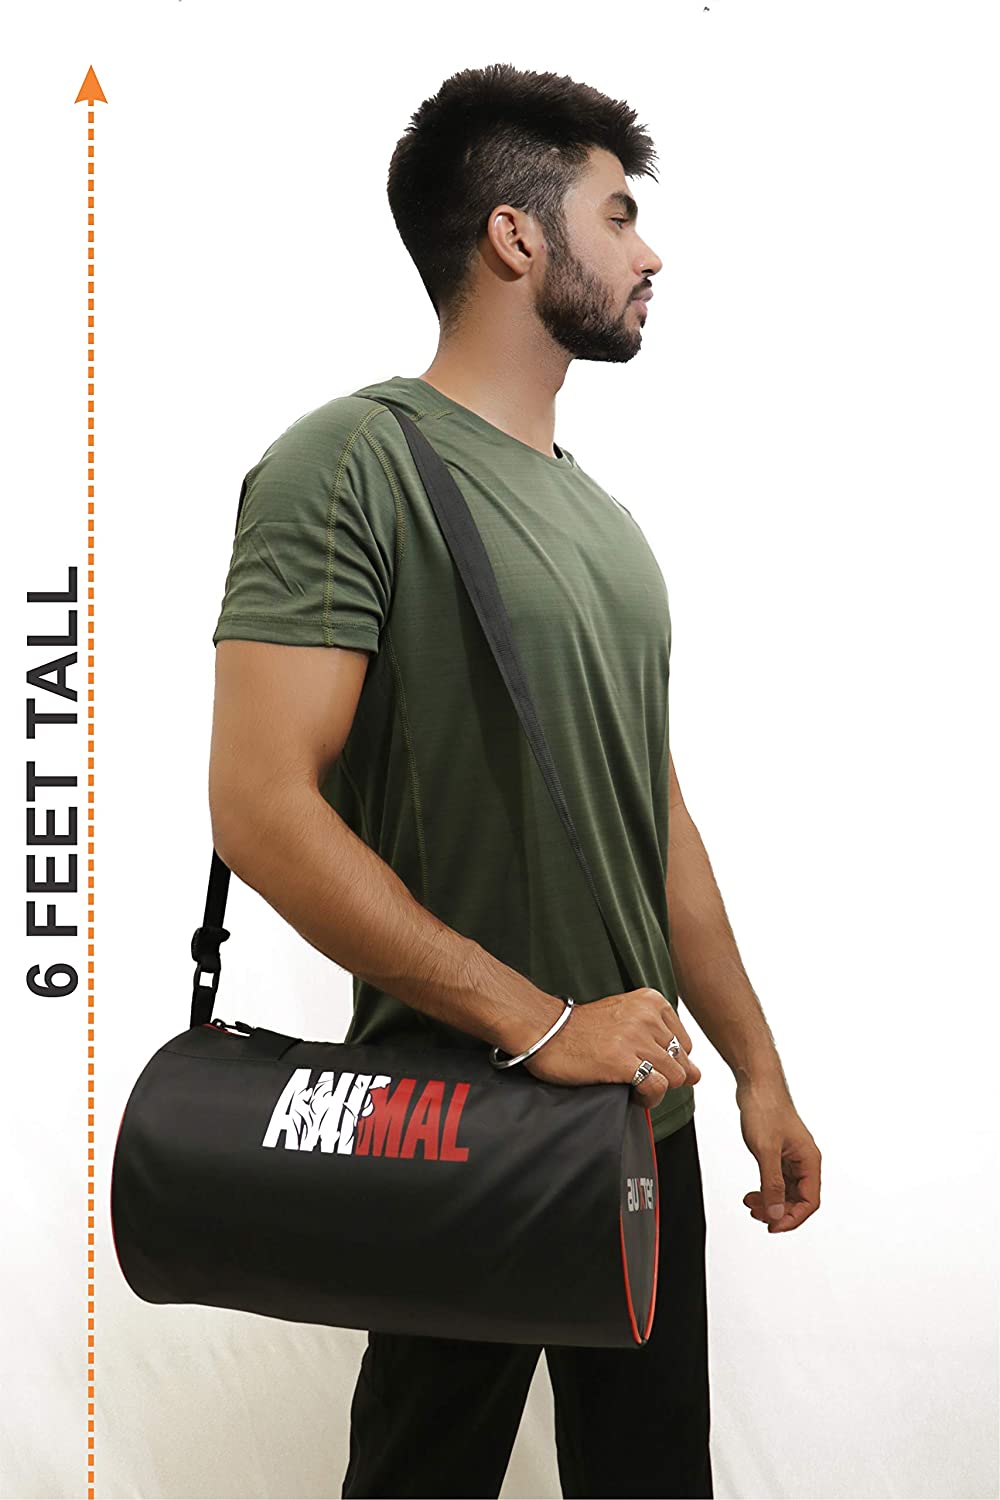 Buy NABAAT Polyester Gym Bags for Men and Women Duffle Bag/Sports Bag/Shoulder  Side Bag for Travel, Water Resistant with Shoe Compartment (Grey_Black,  GMB-GRBK2) at Amazon.in